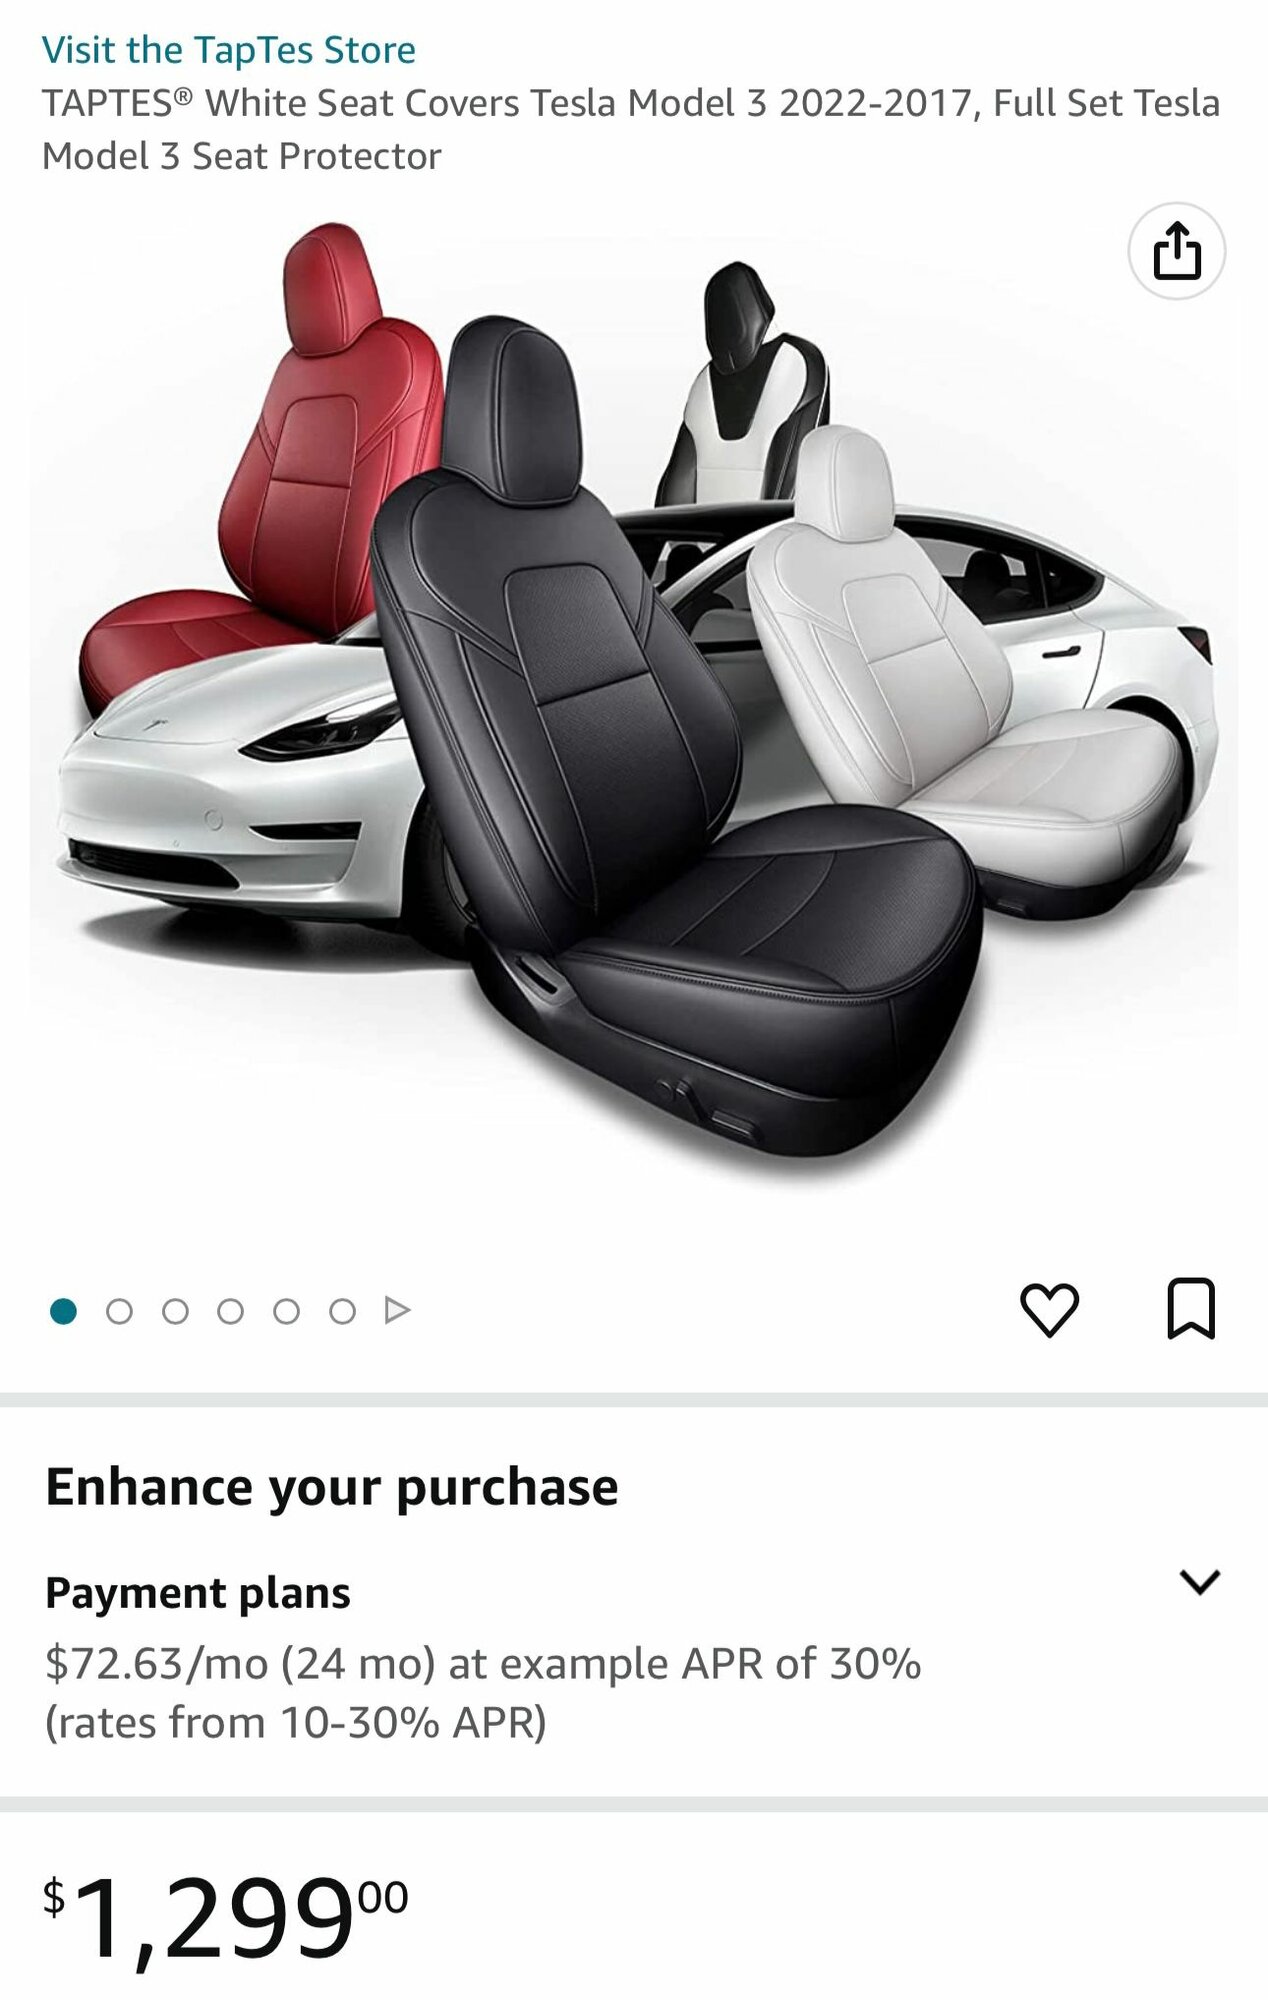 Brand new model 3 TapTes white Nappa Leather seat covers for sale.